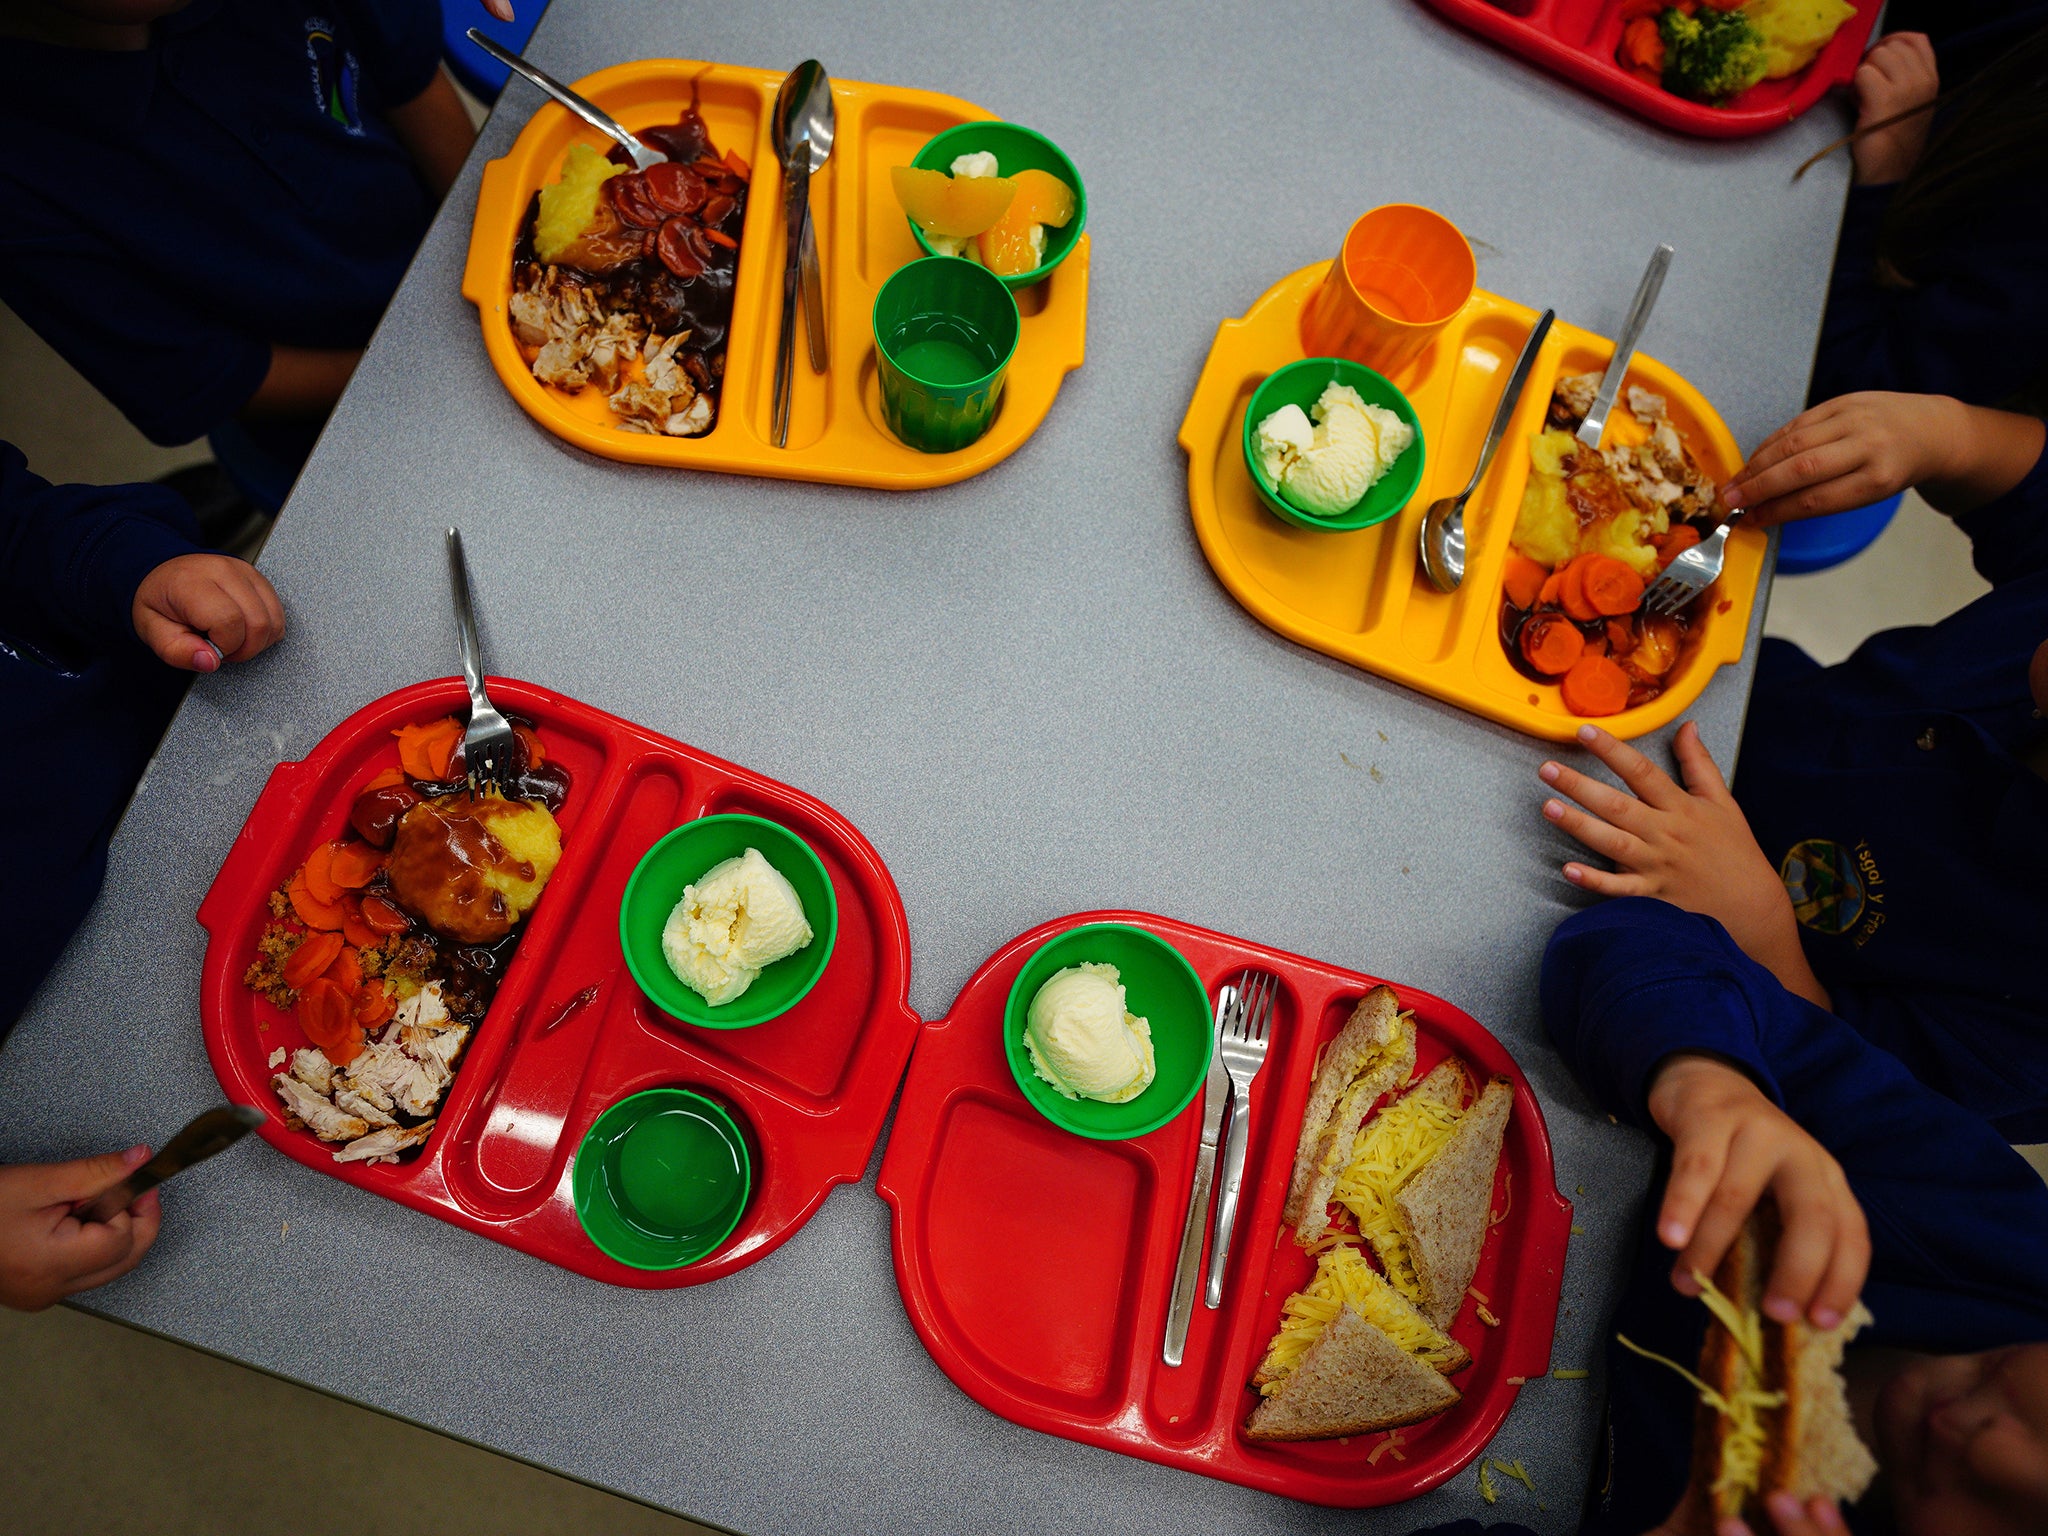 ‘The government should urgently extend free school meals to all families in poverty’